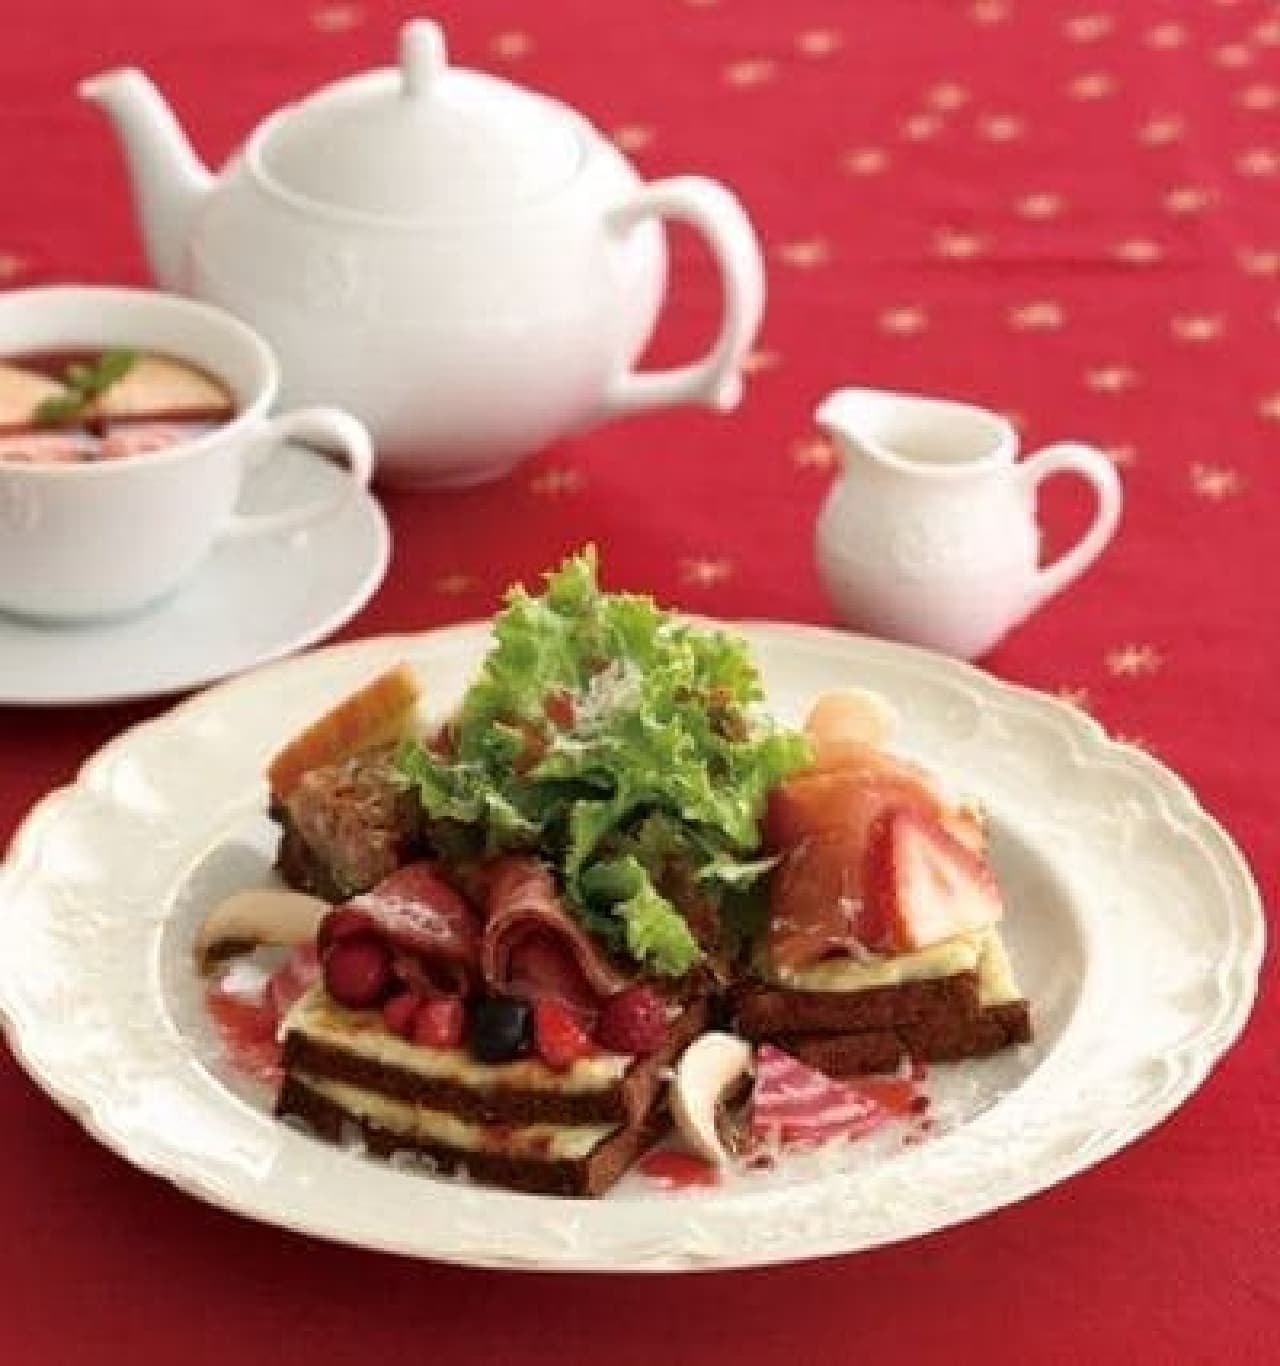 Afternoon Tea Tea Room "Open Sandwich with Prosciutto and Roast Beef"